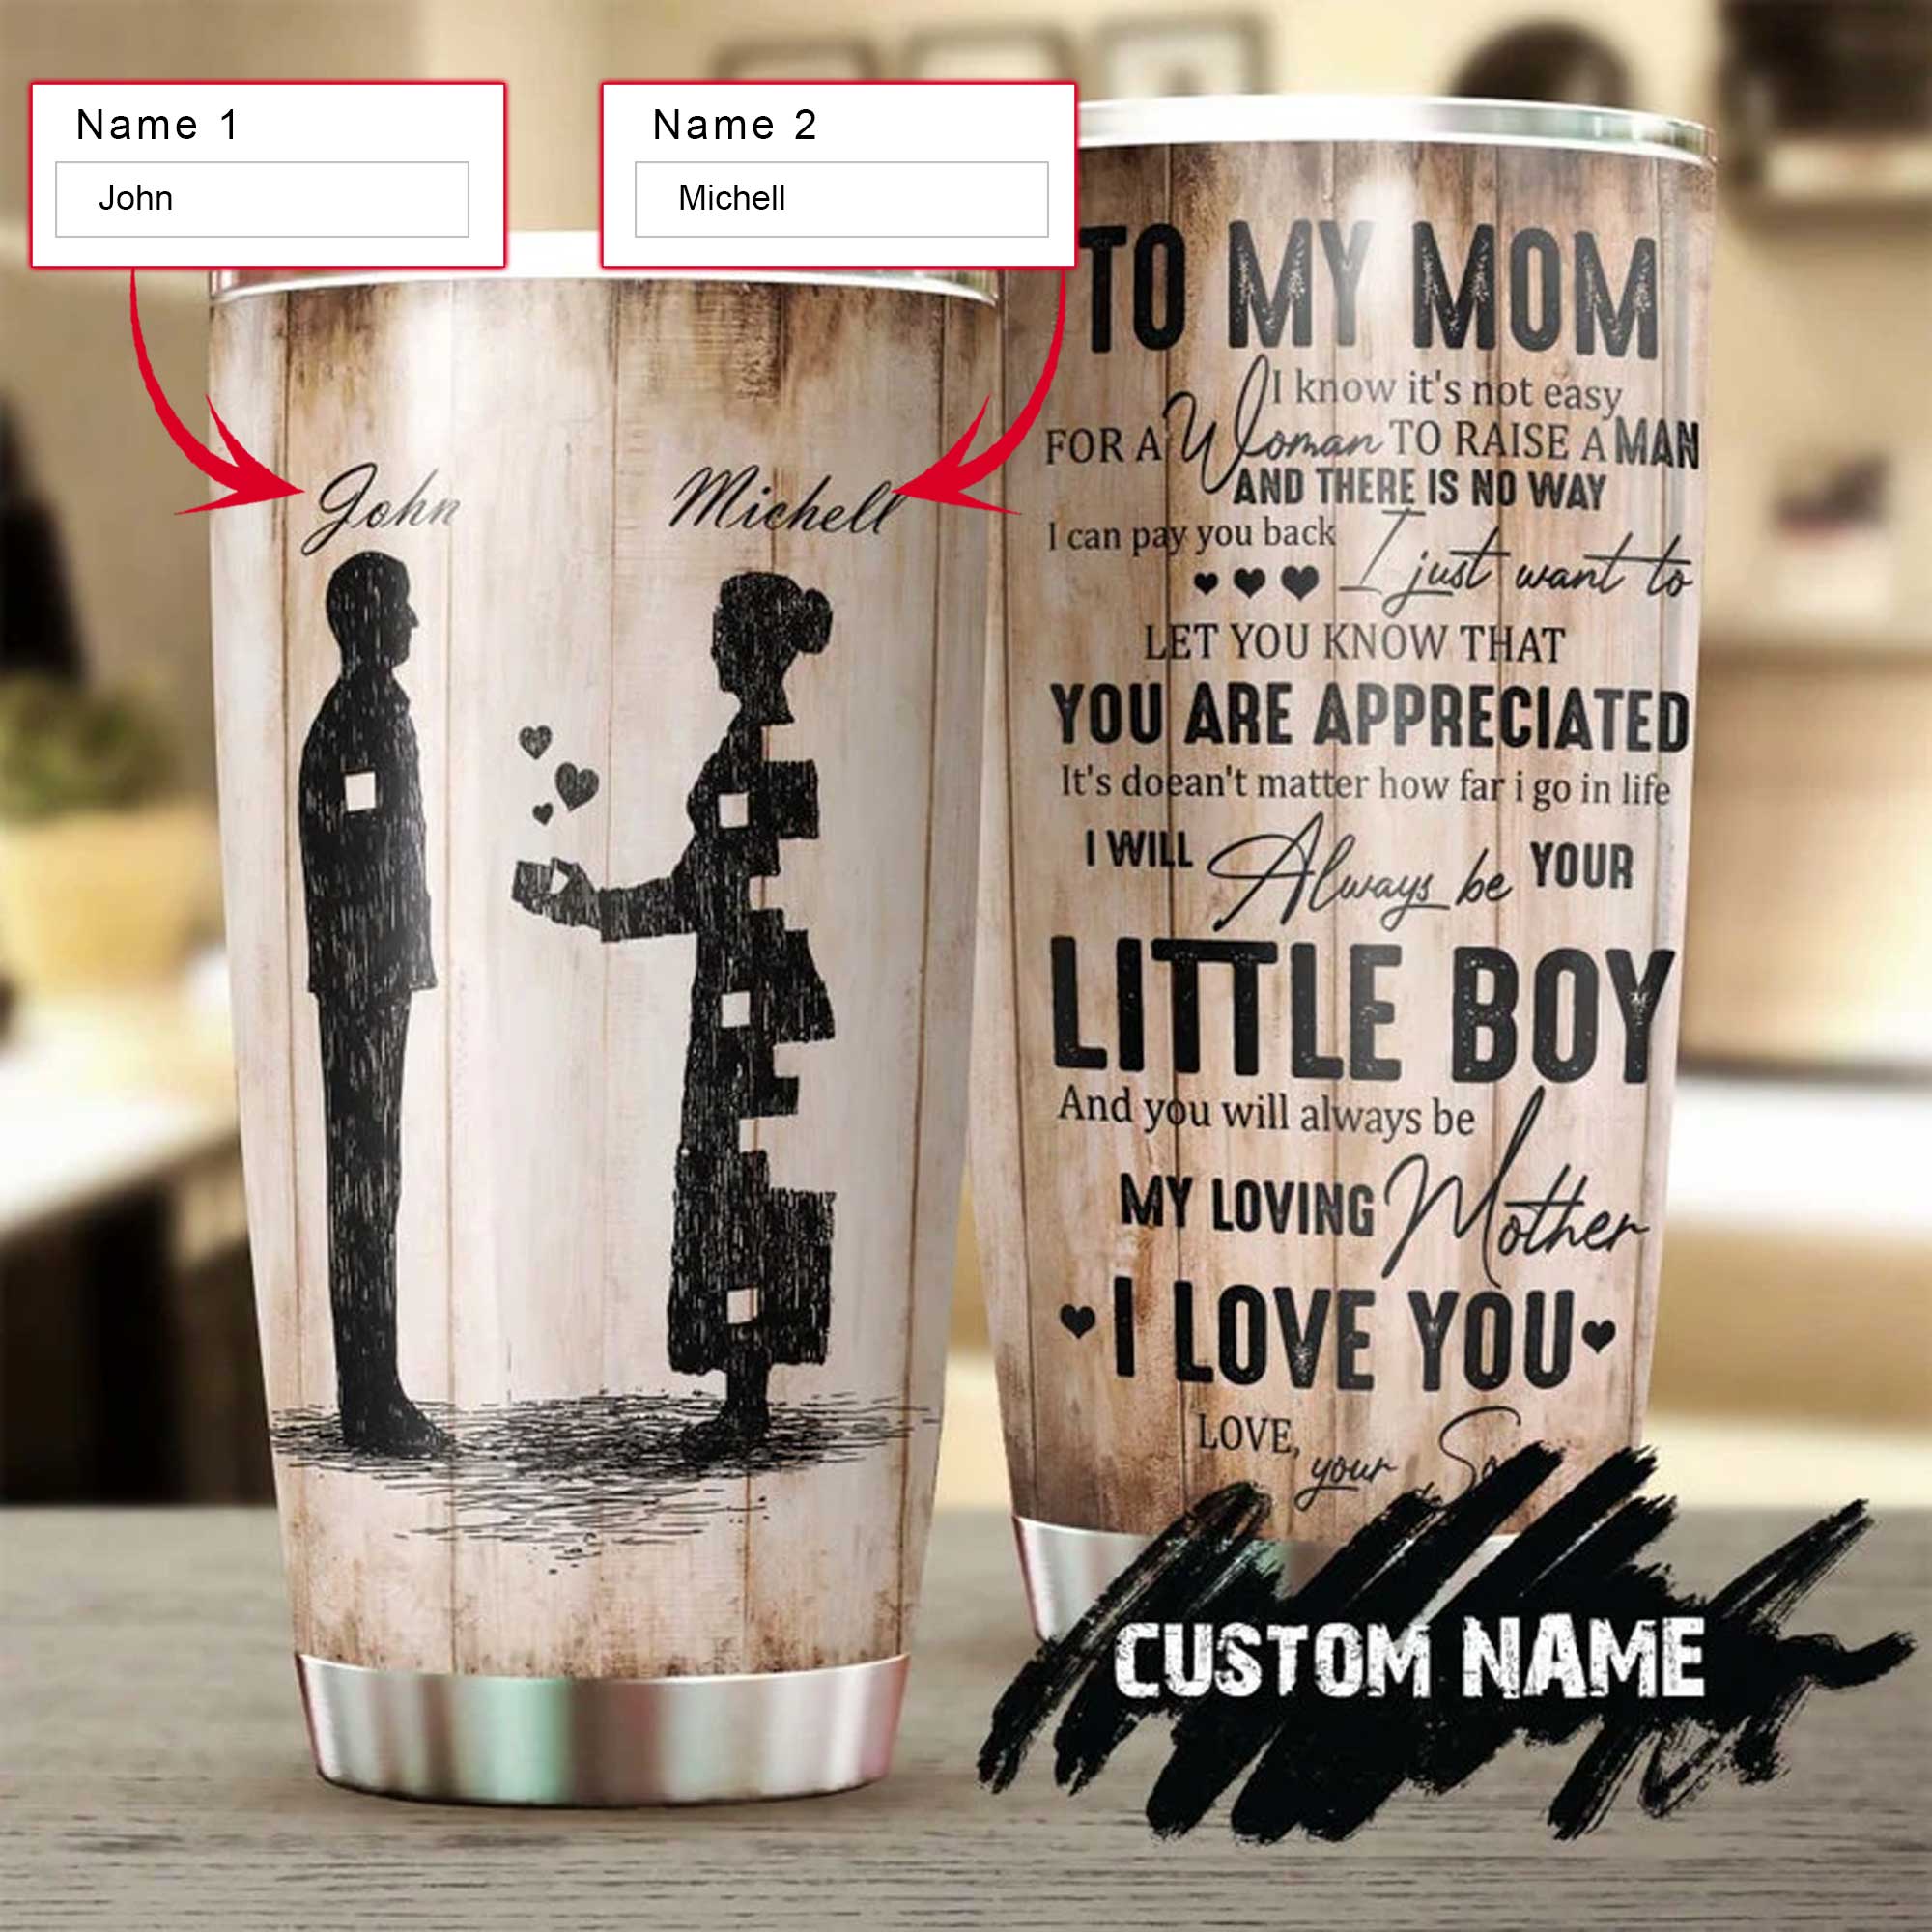 Personalized Mother's Day Gift Tumbler - Custom Gift For Mother's Day, Presents For Mom - I'll Always Be Your Little Boy My Loving Mother Tumbler